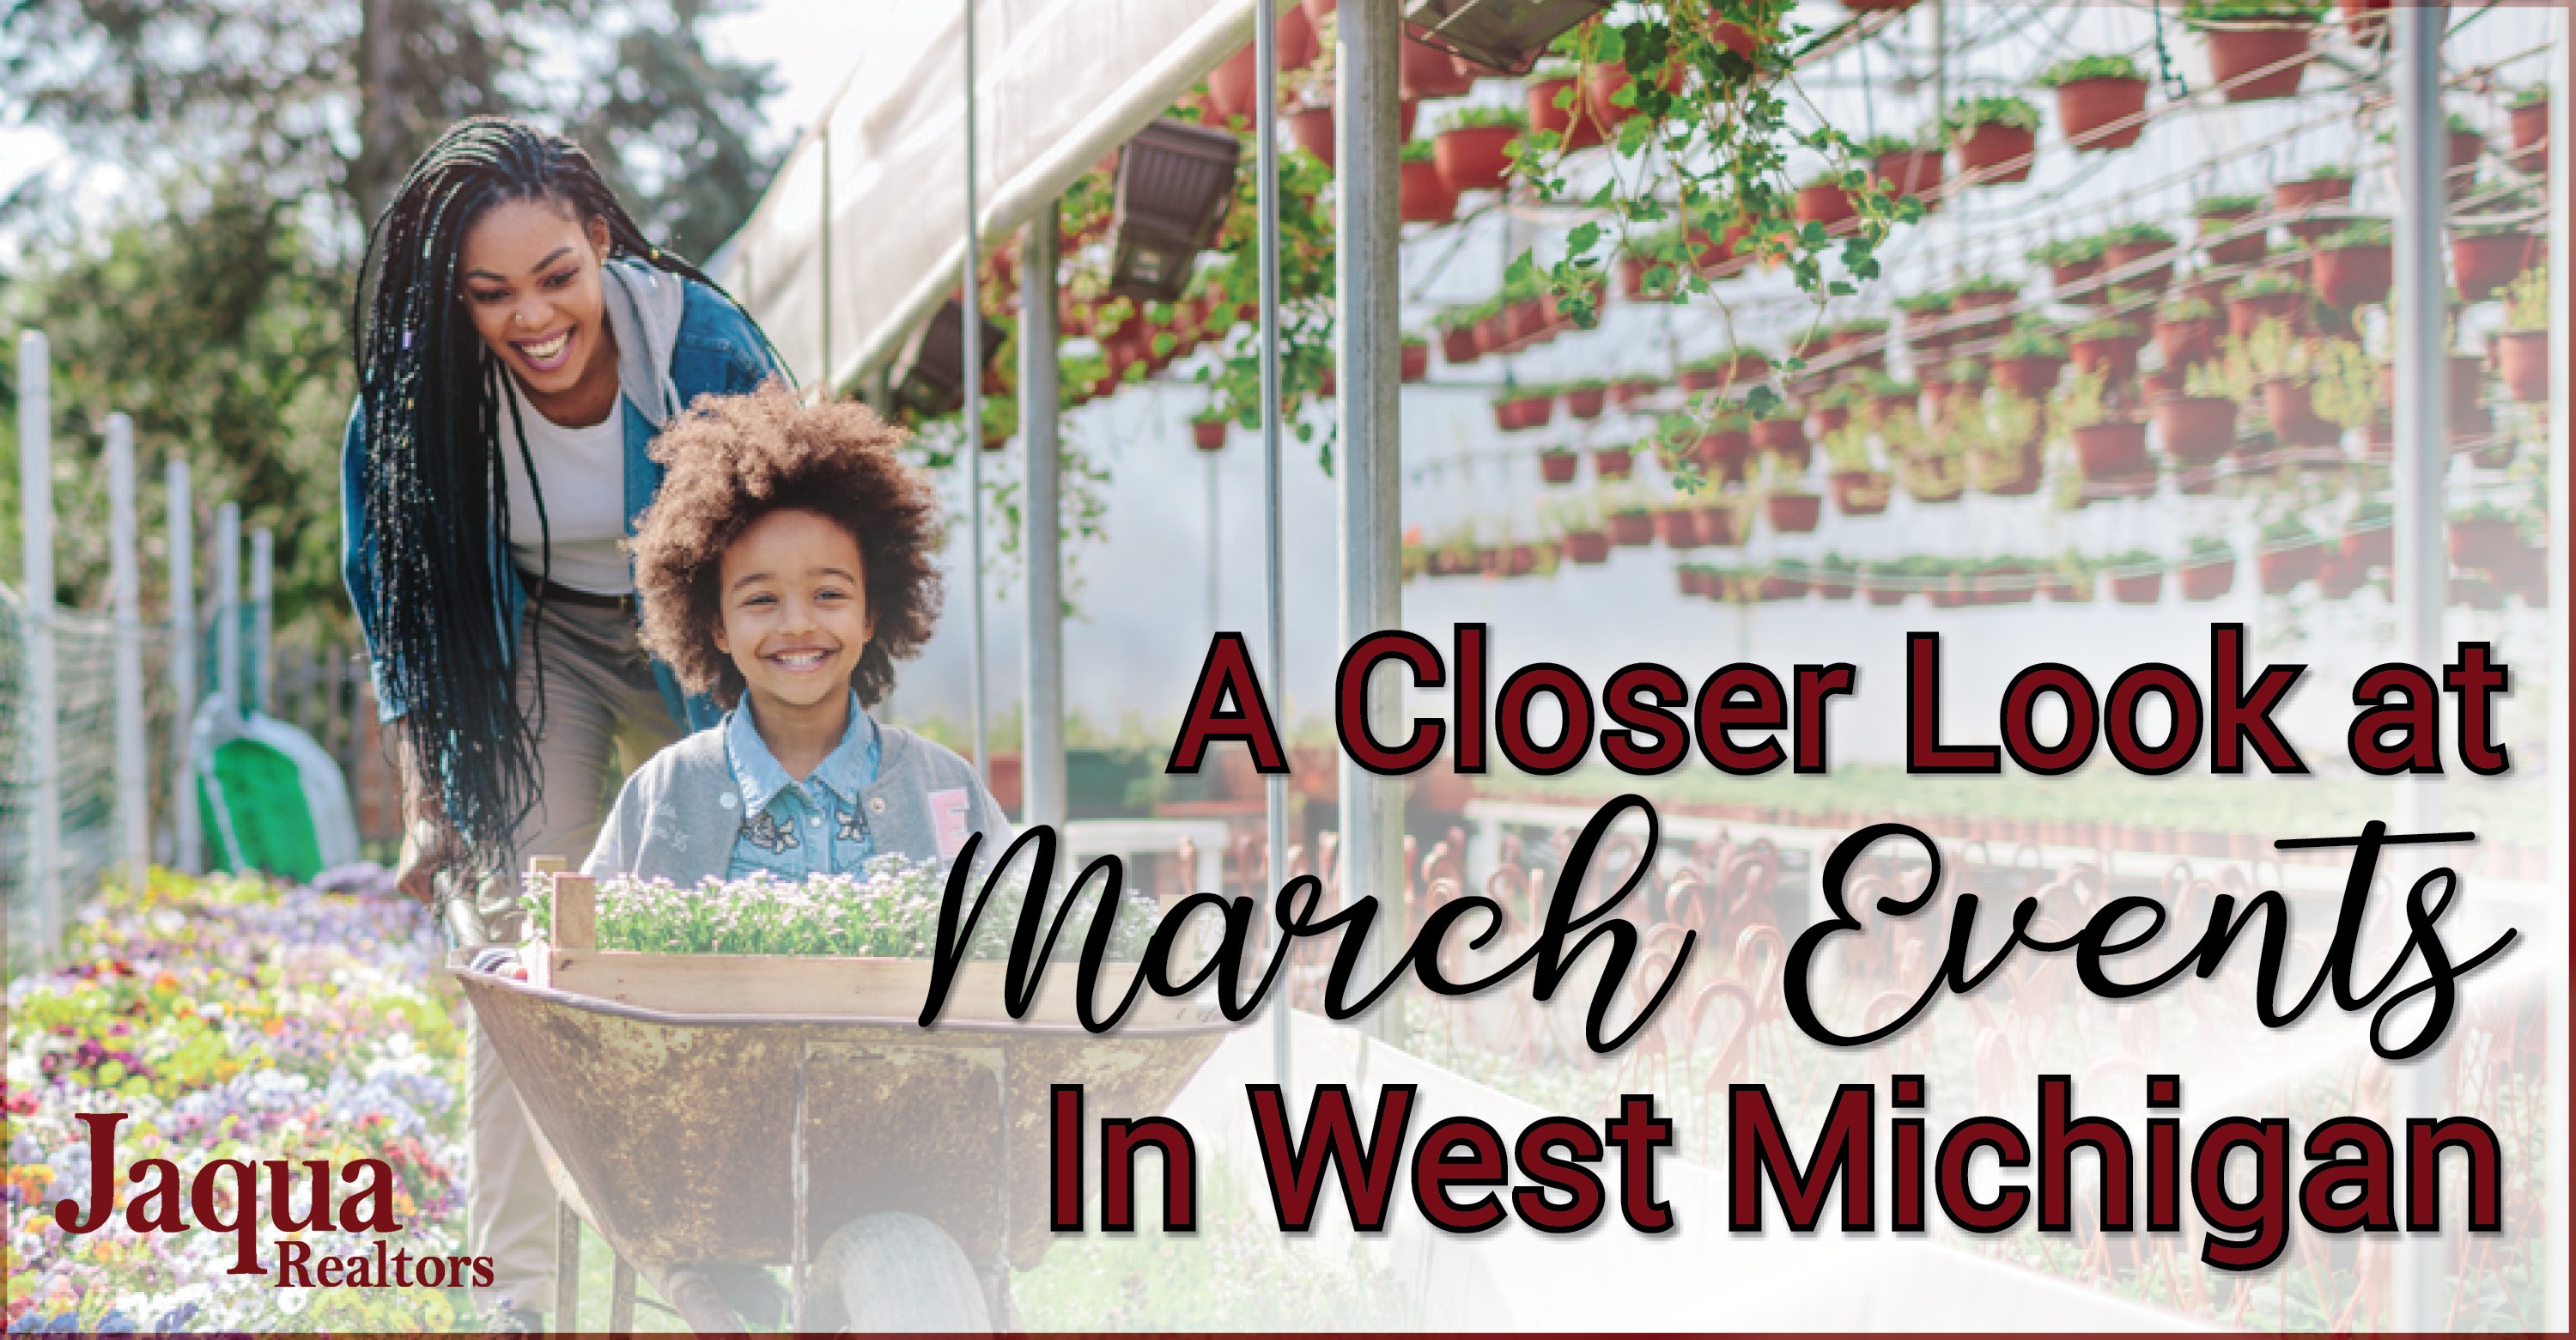 A Closer Look at March Events in West Michigan